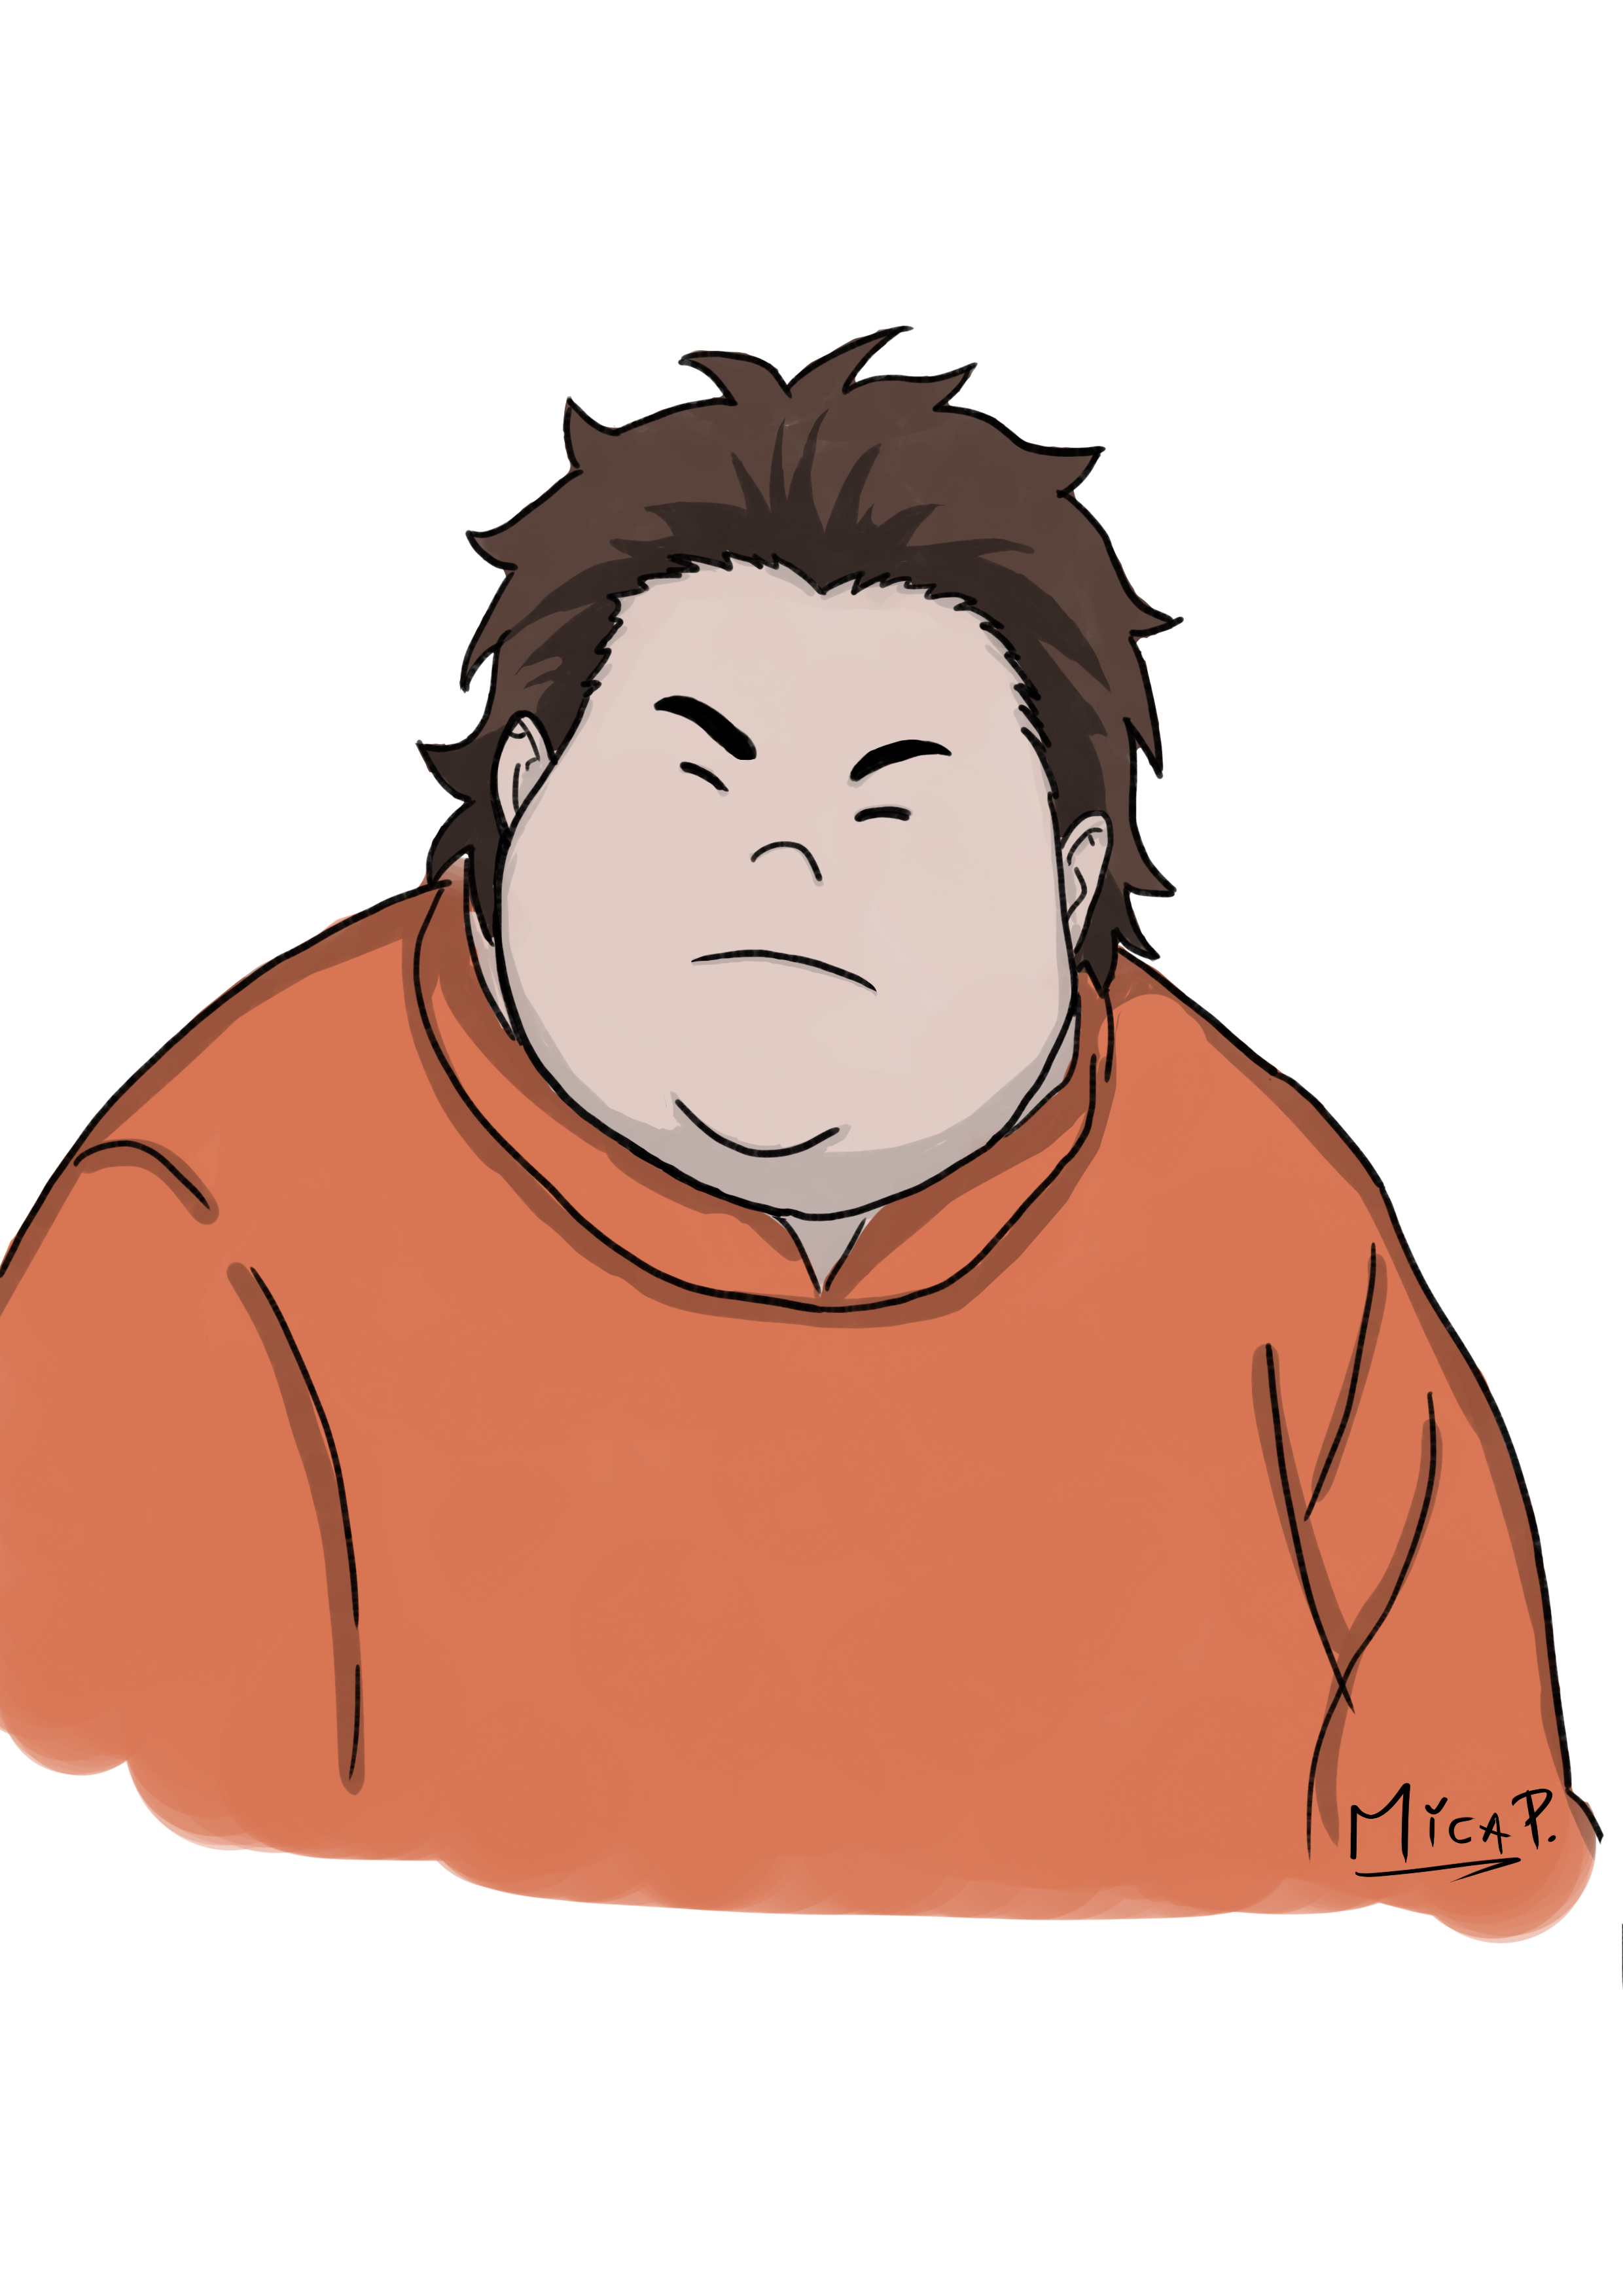 Mikz Try Drawing Isami Aldini From Shokugeki No Soma For A School Project Kinda Awkward Since I M Not Used To Drawing On A Wacom イサミアルディーニ 食戟のソーマ Shokugekinosoma T Co Pw8zsv743r Twitter